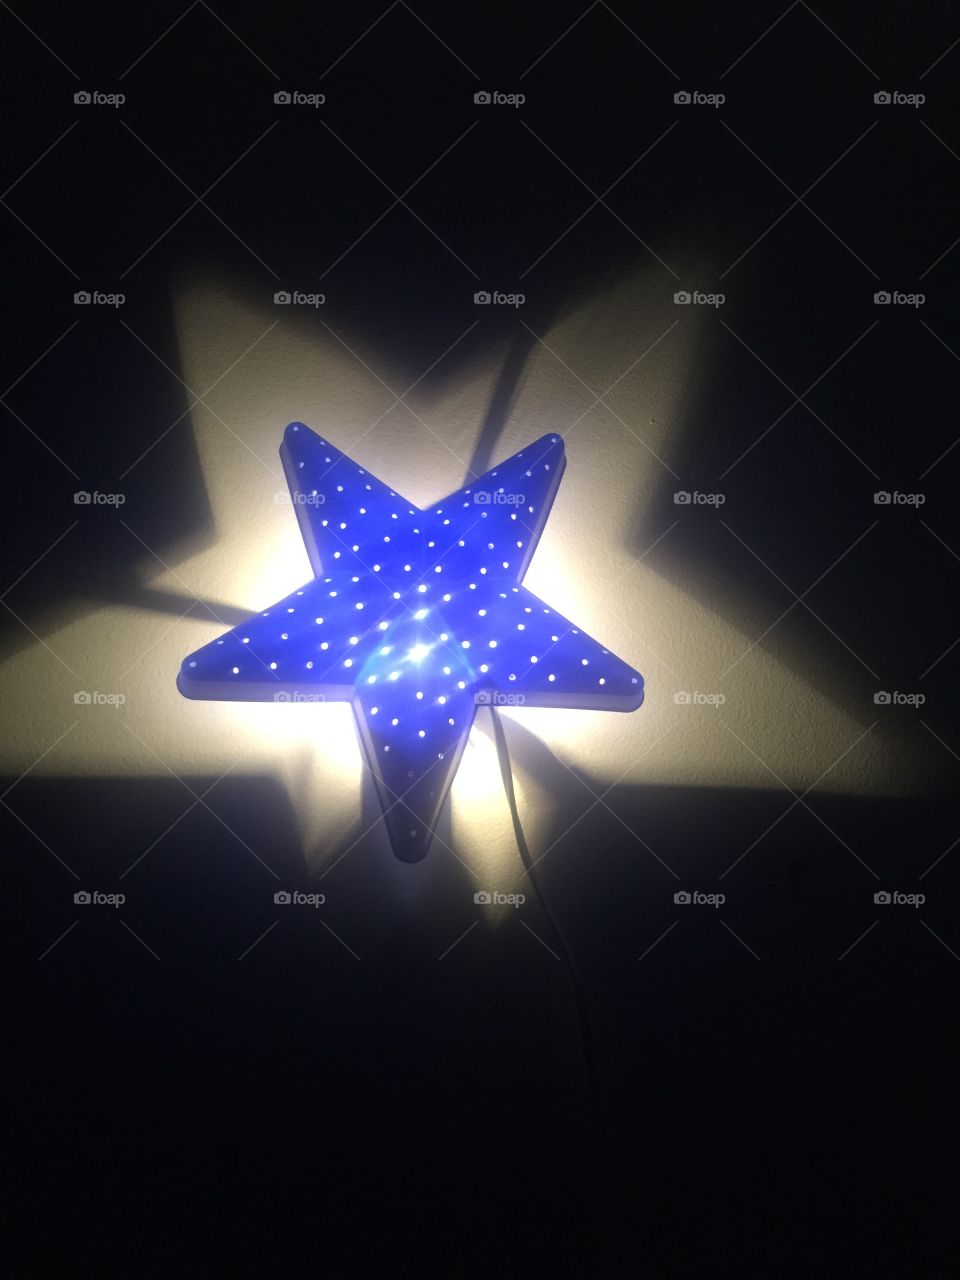 Light on a wall in form of a star